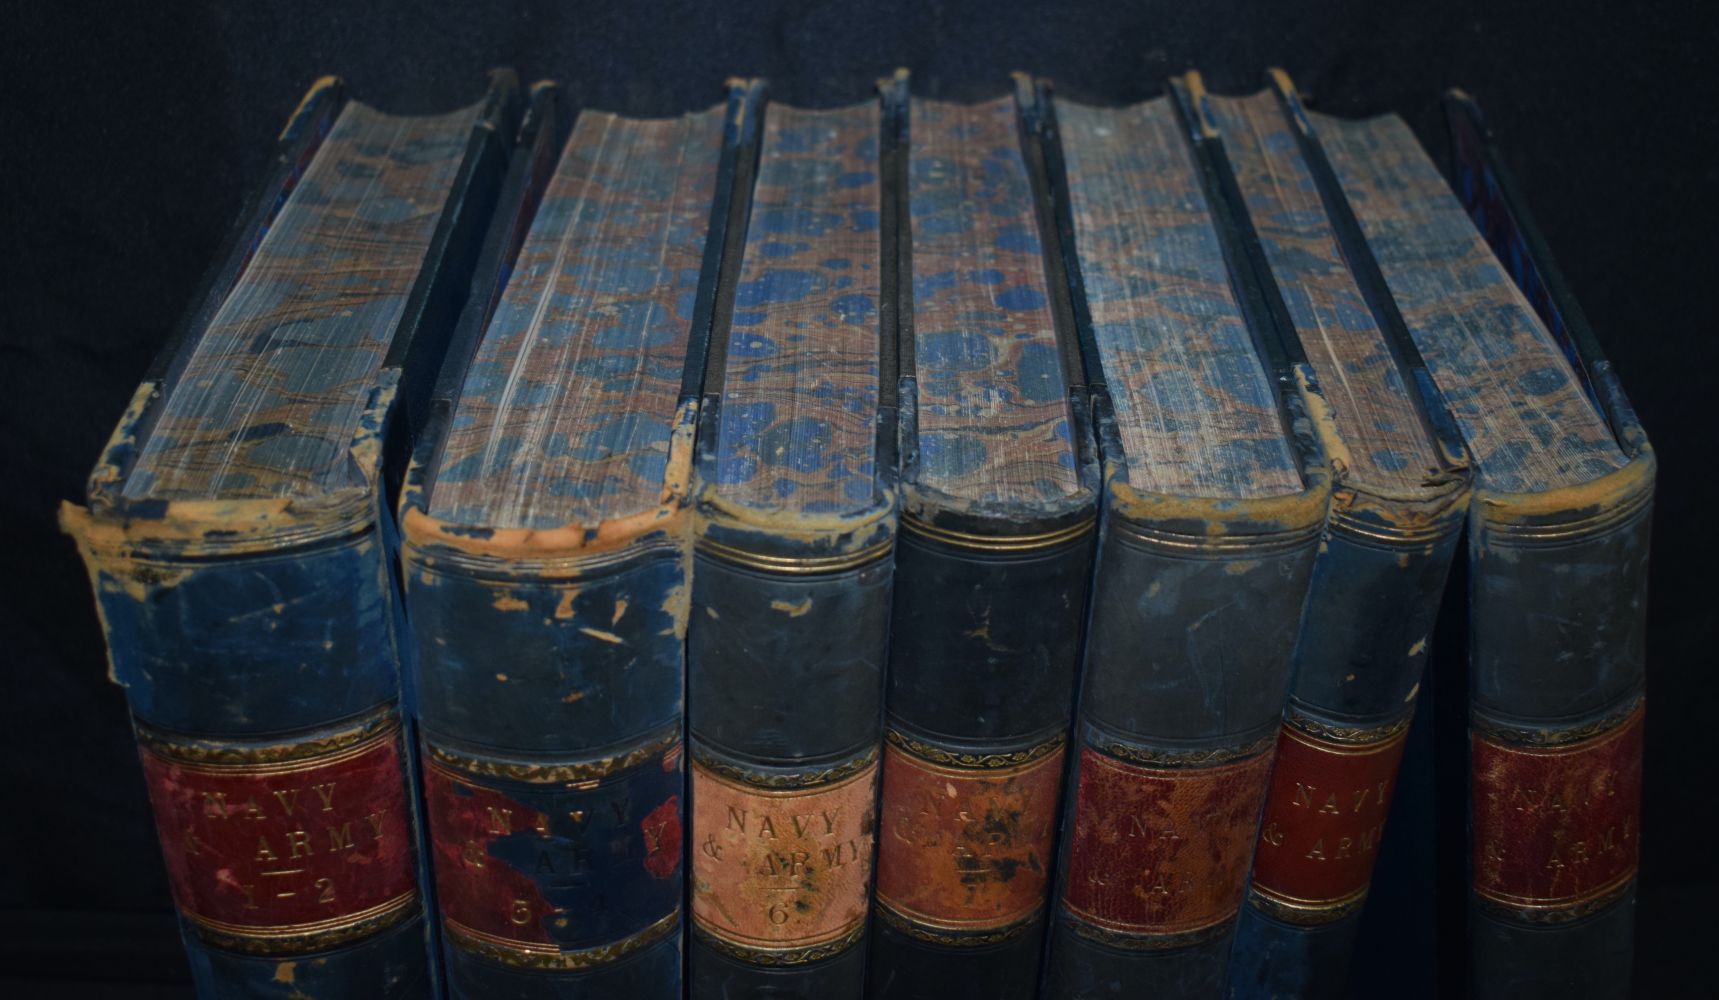 A collection of Navy and Army illustrated , 9 volumes over 7 books , published by Huson & Kearns 5.5 - Image 6 of 8